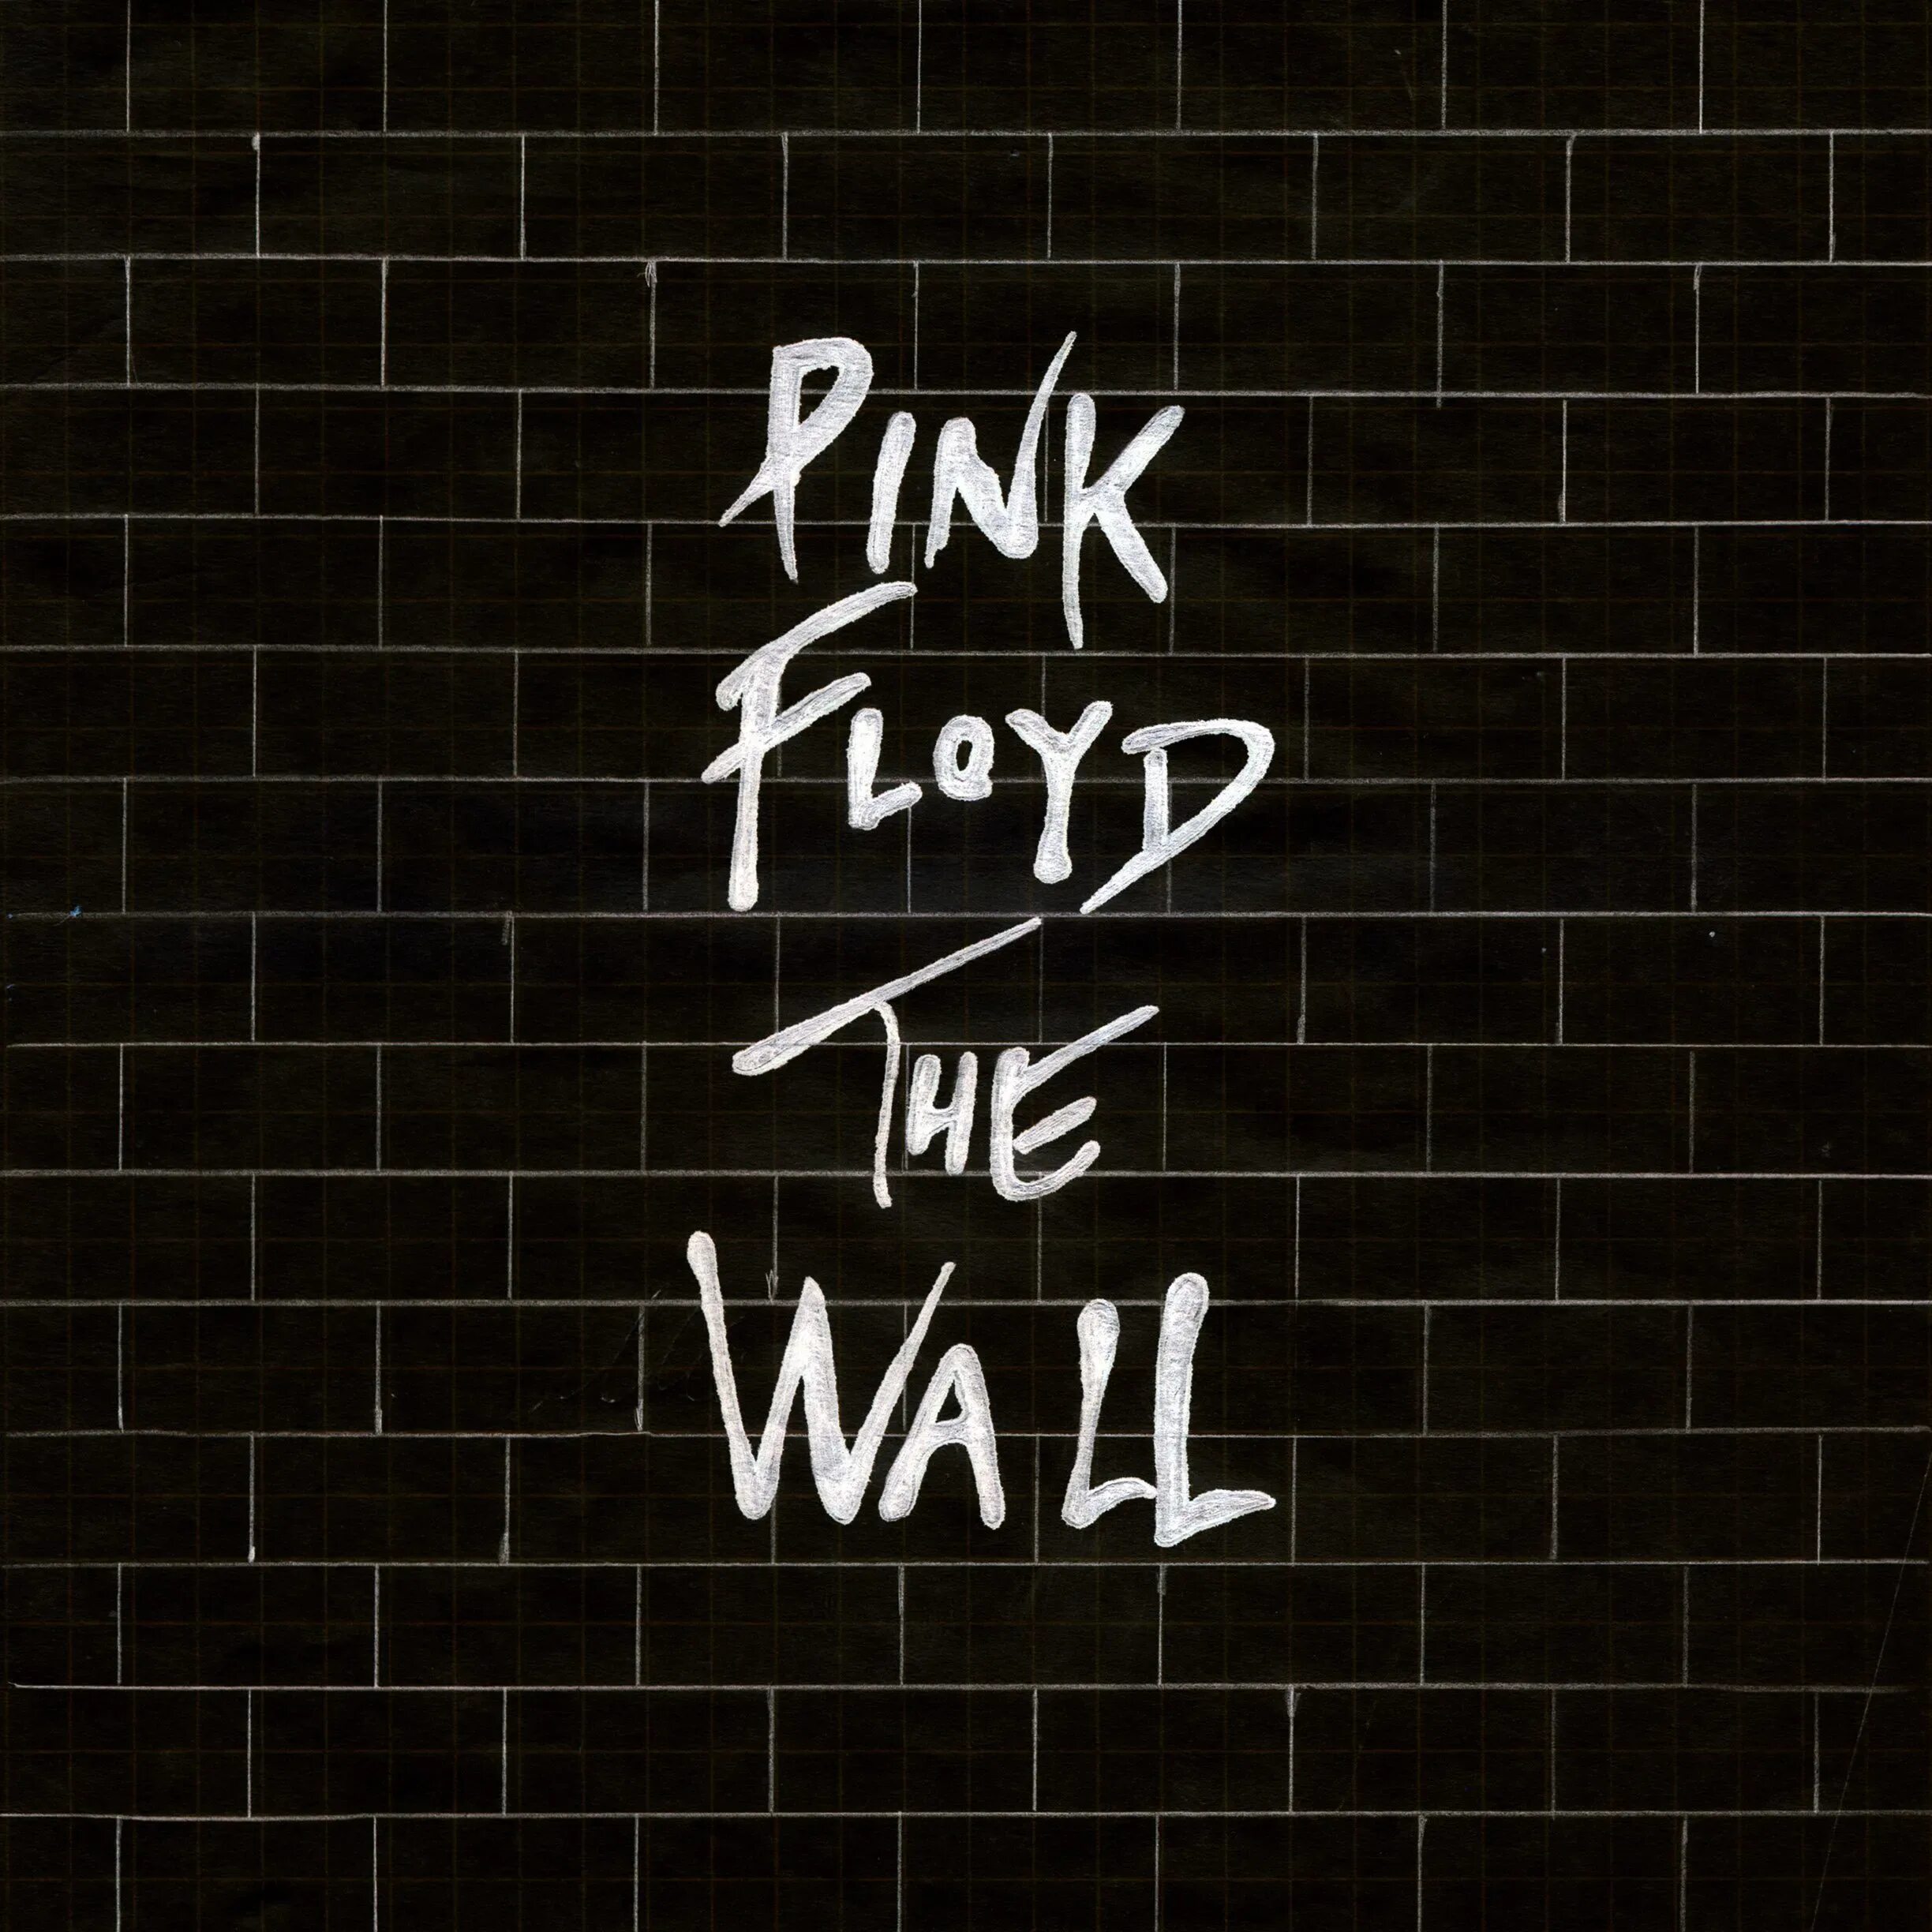 Pink Floyd the Wall обложка. Pink Floyd 1979 the Wall обложка. Pink Floyd the Wall обои. Альбом the Wall. Walls cover